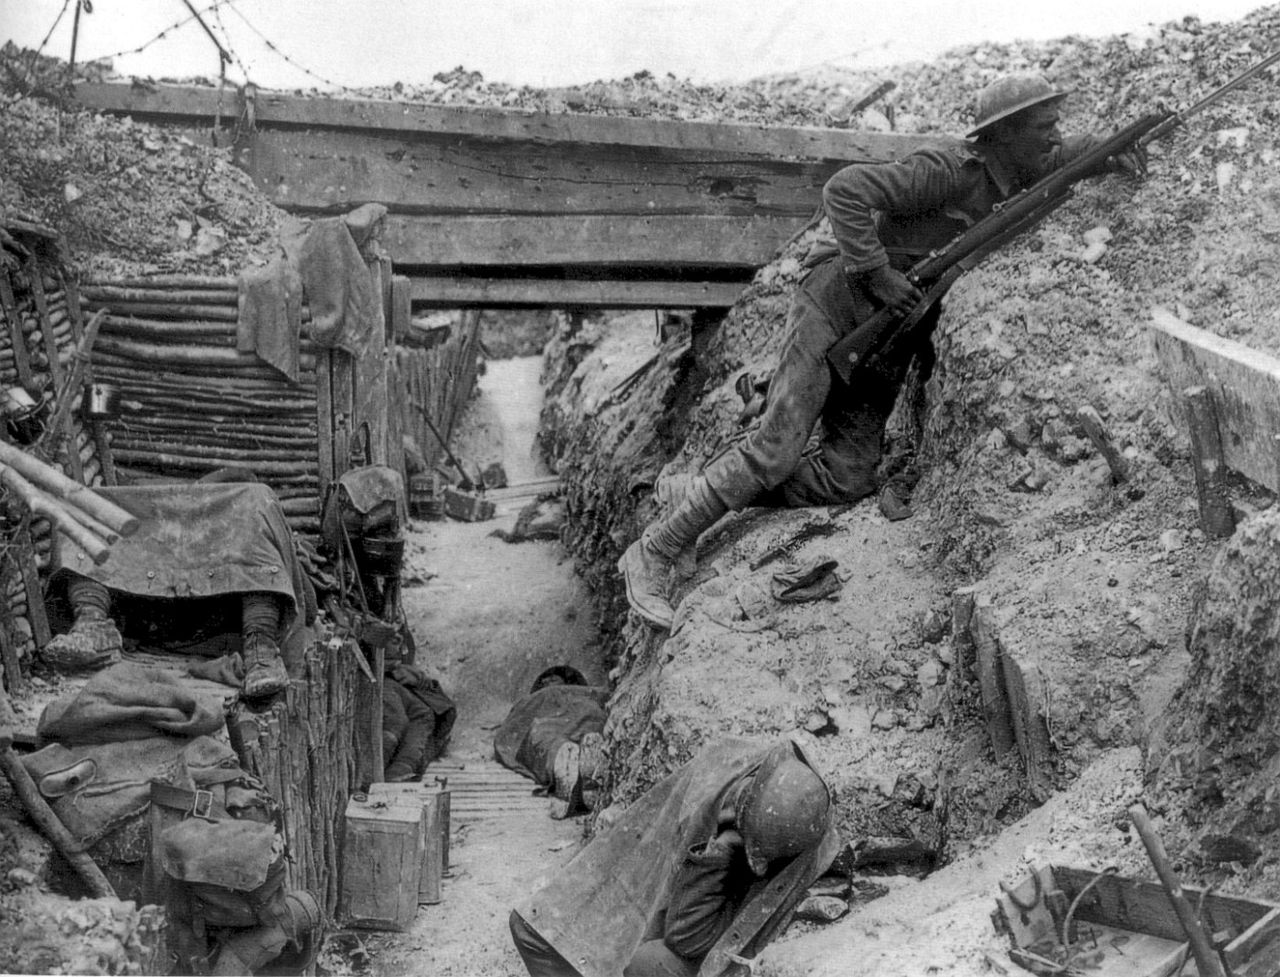 Trenches of the 11th Cheshire Regiment at Ovillers-la-Boisselle, on the Somme, July 1916. (Wikimedia Commons)